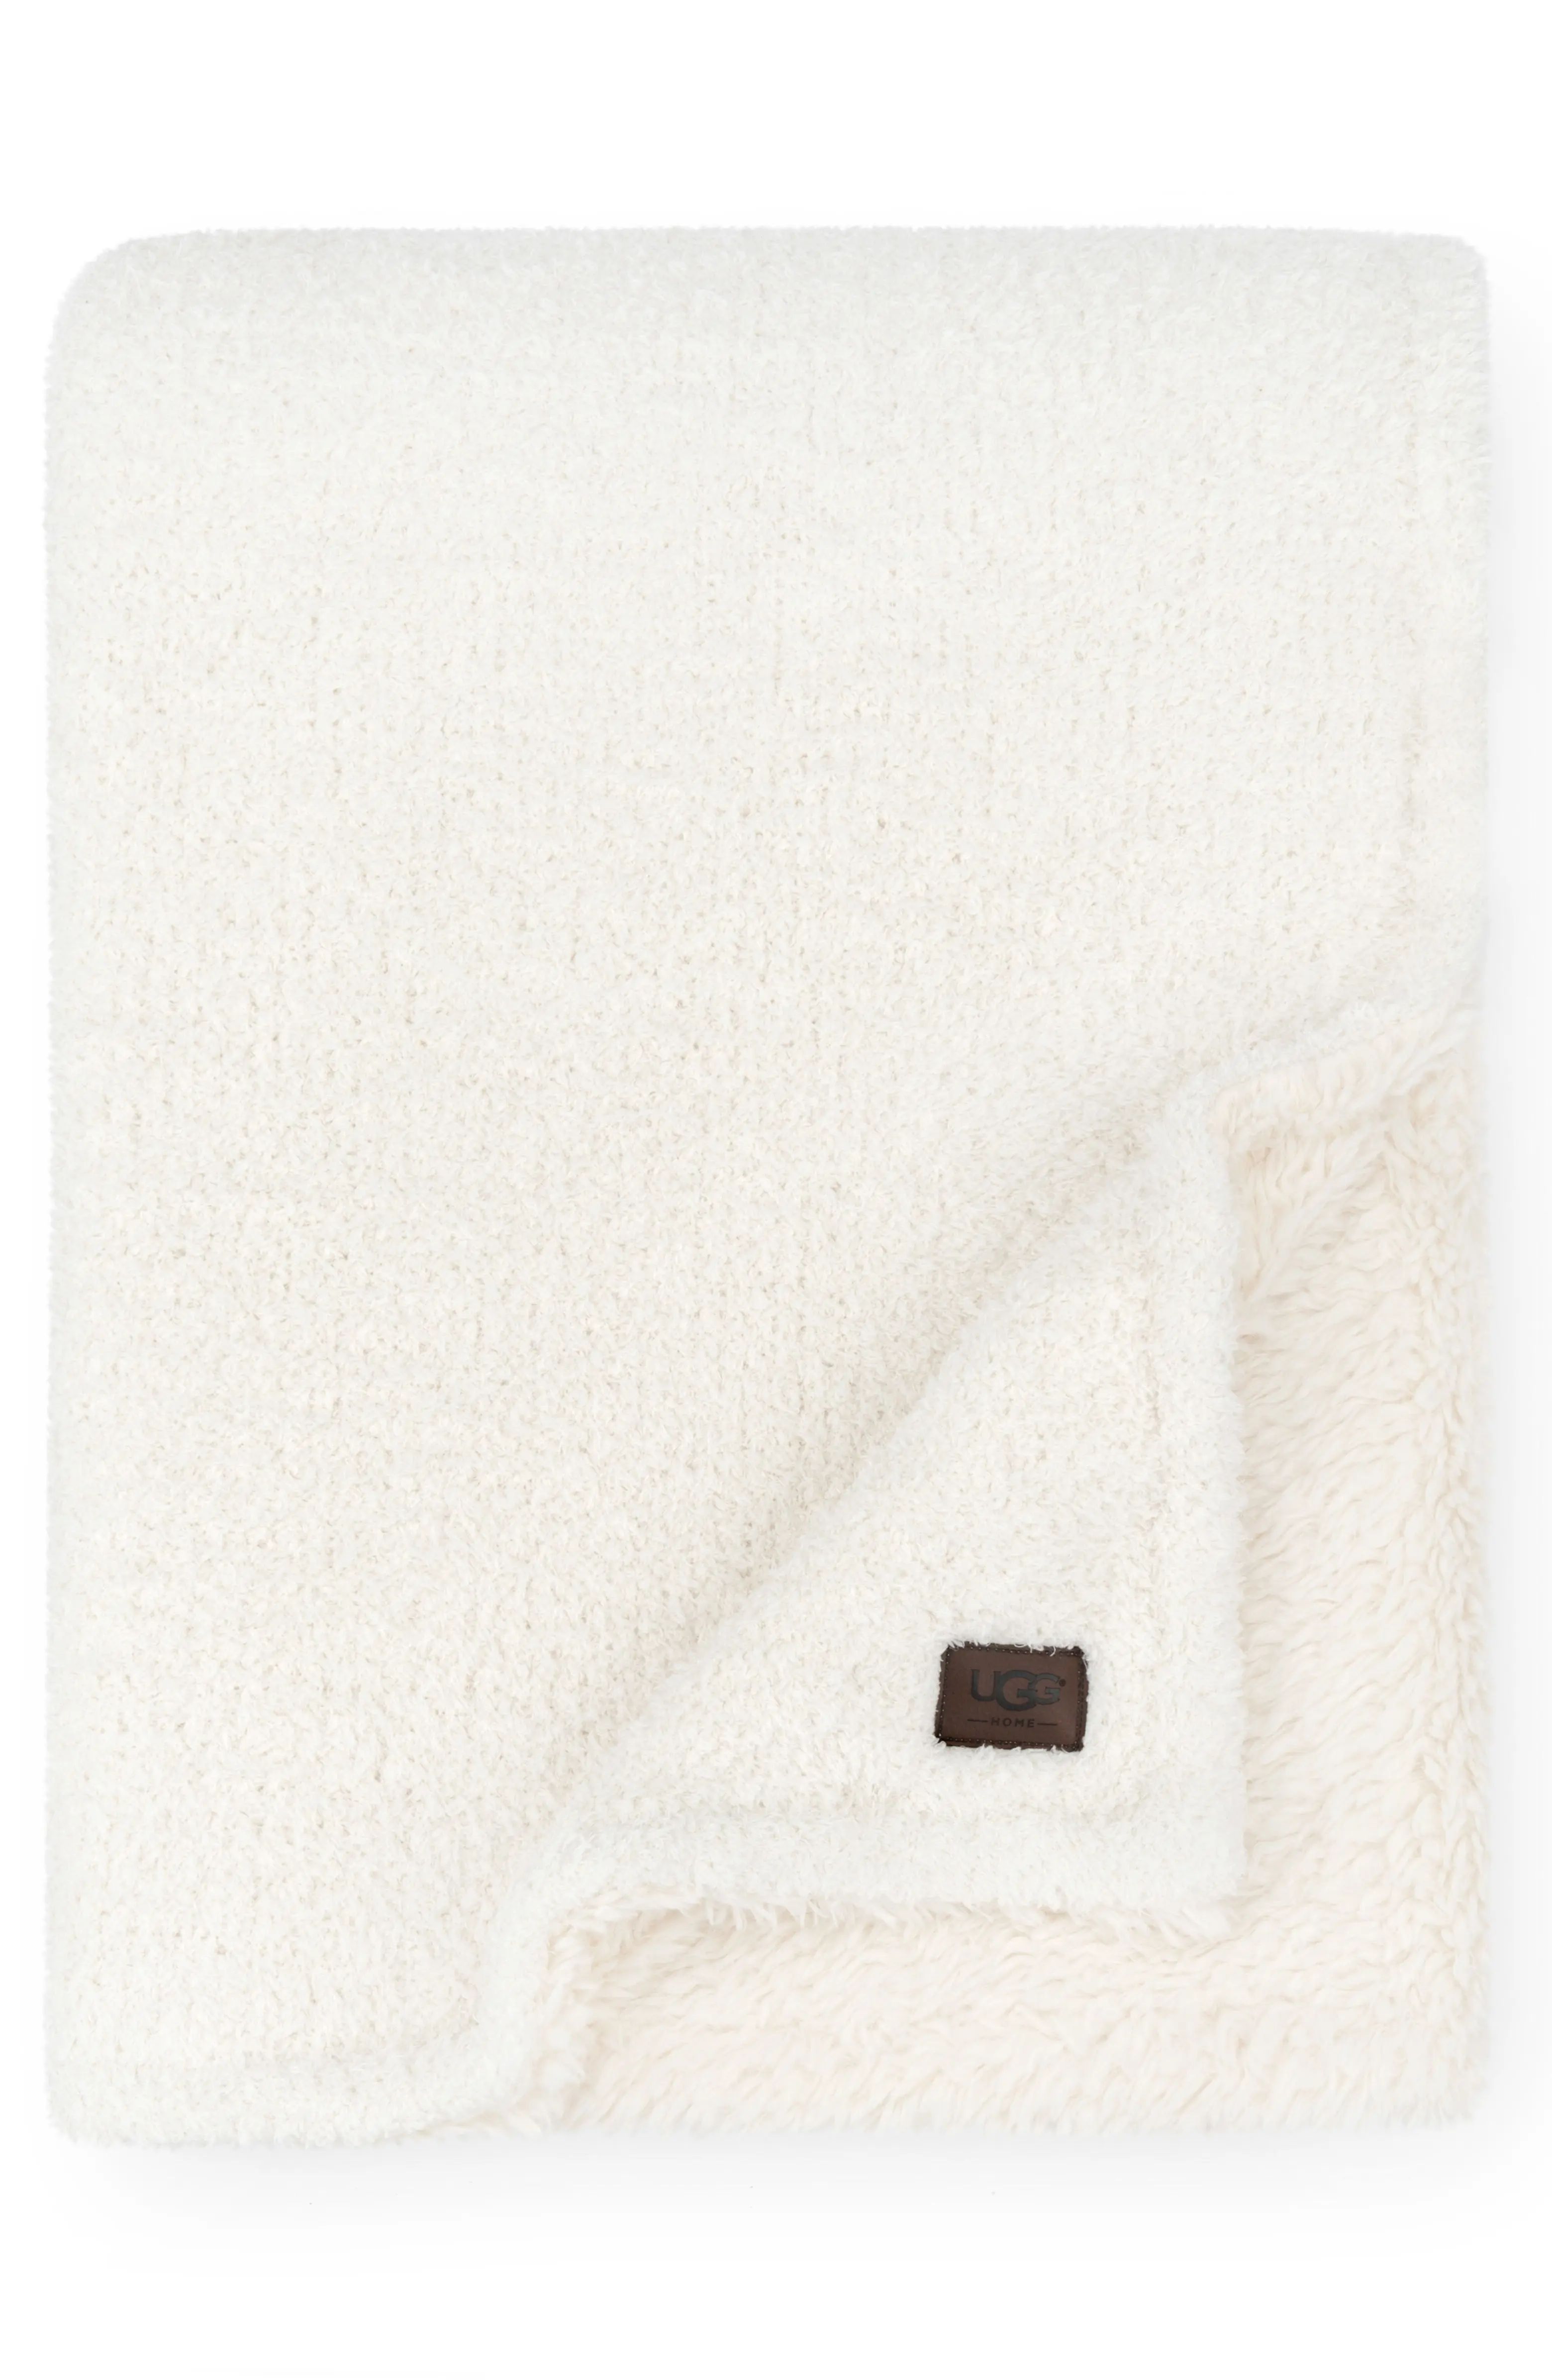 Ana Faux Shearling Throw | Nordstrom